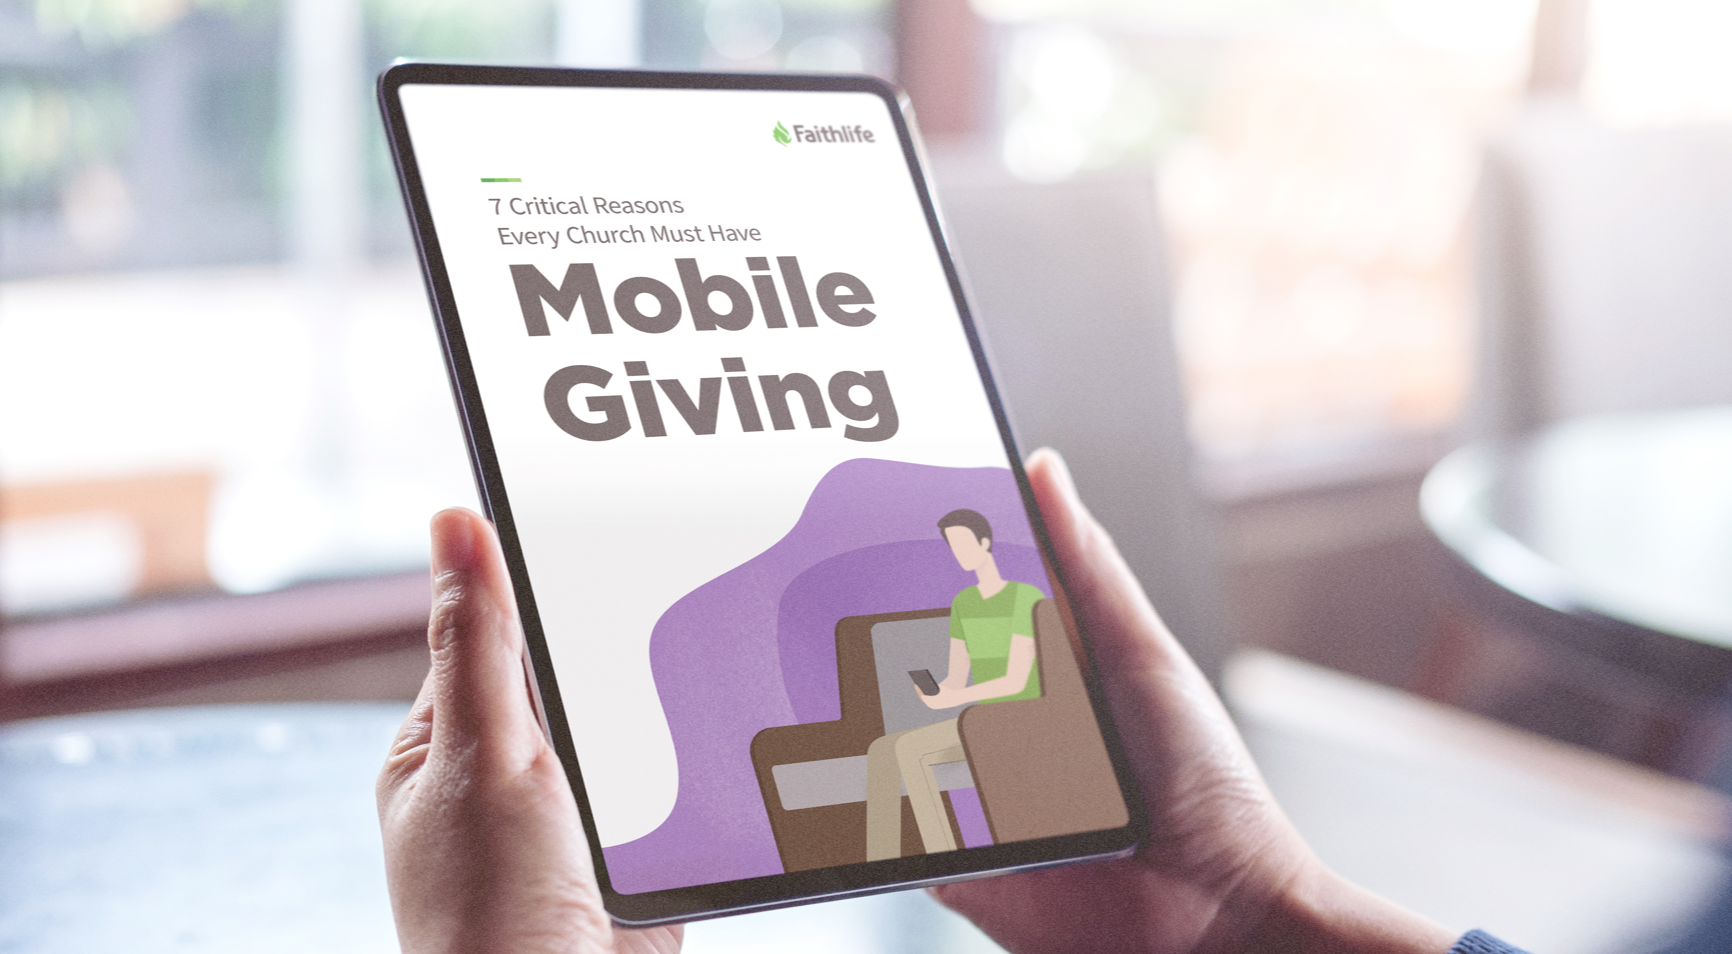 7 Critical Reasons Every Church Must Have Mobile Giving